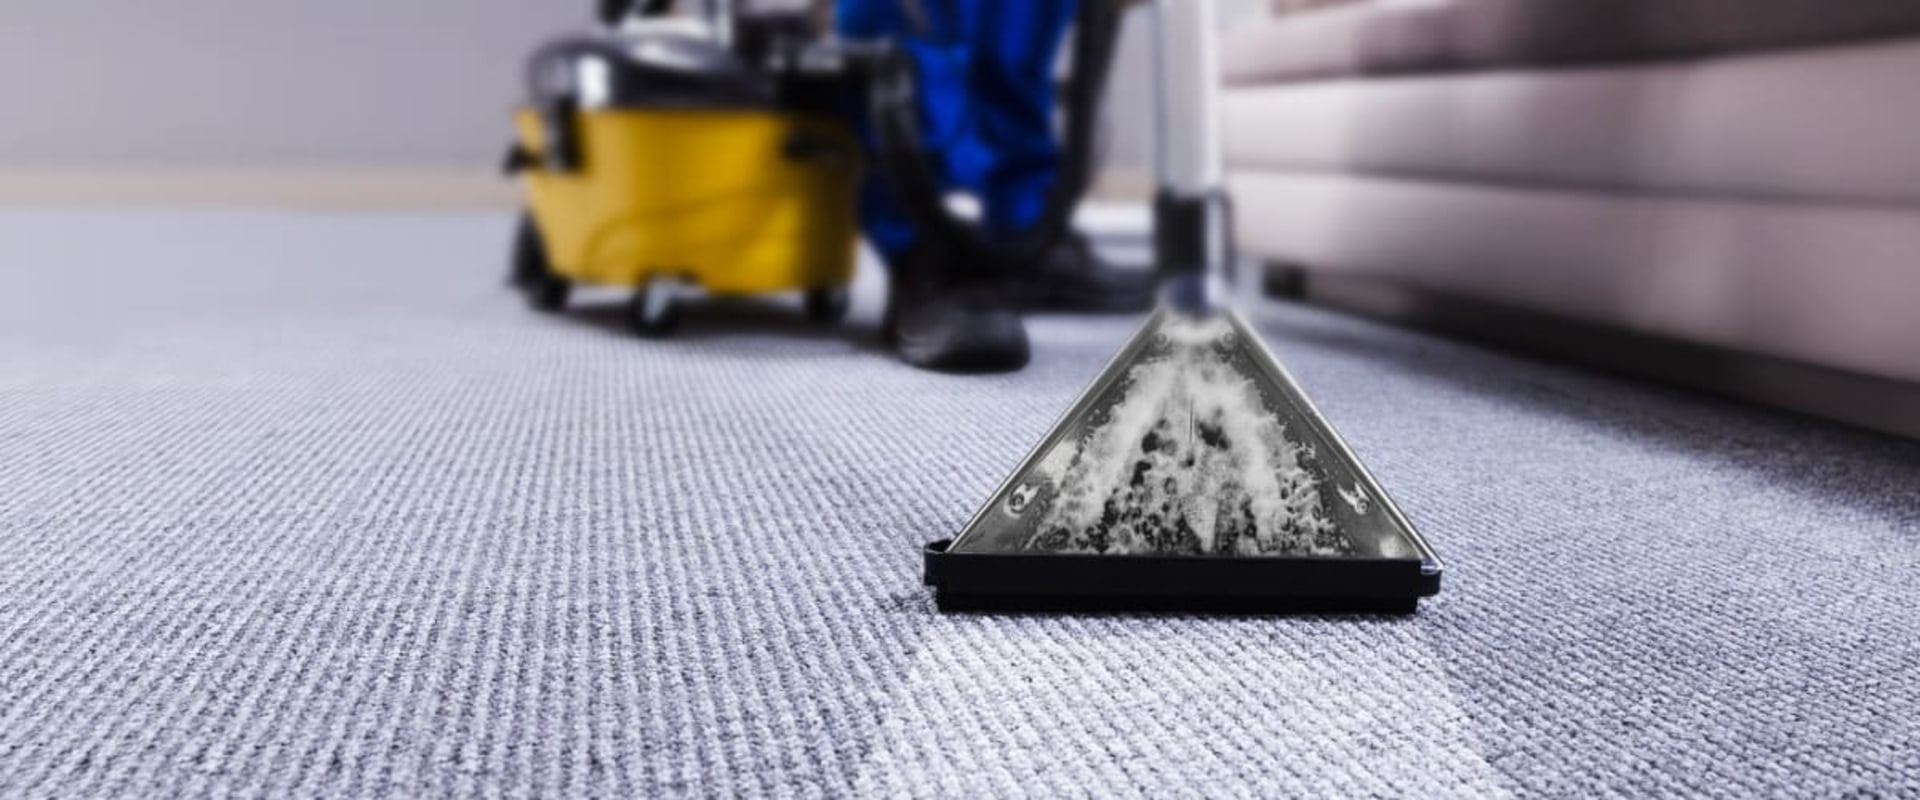 What is the best way to clean carpets?